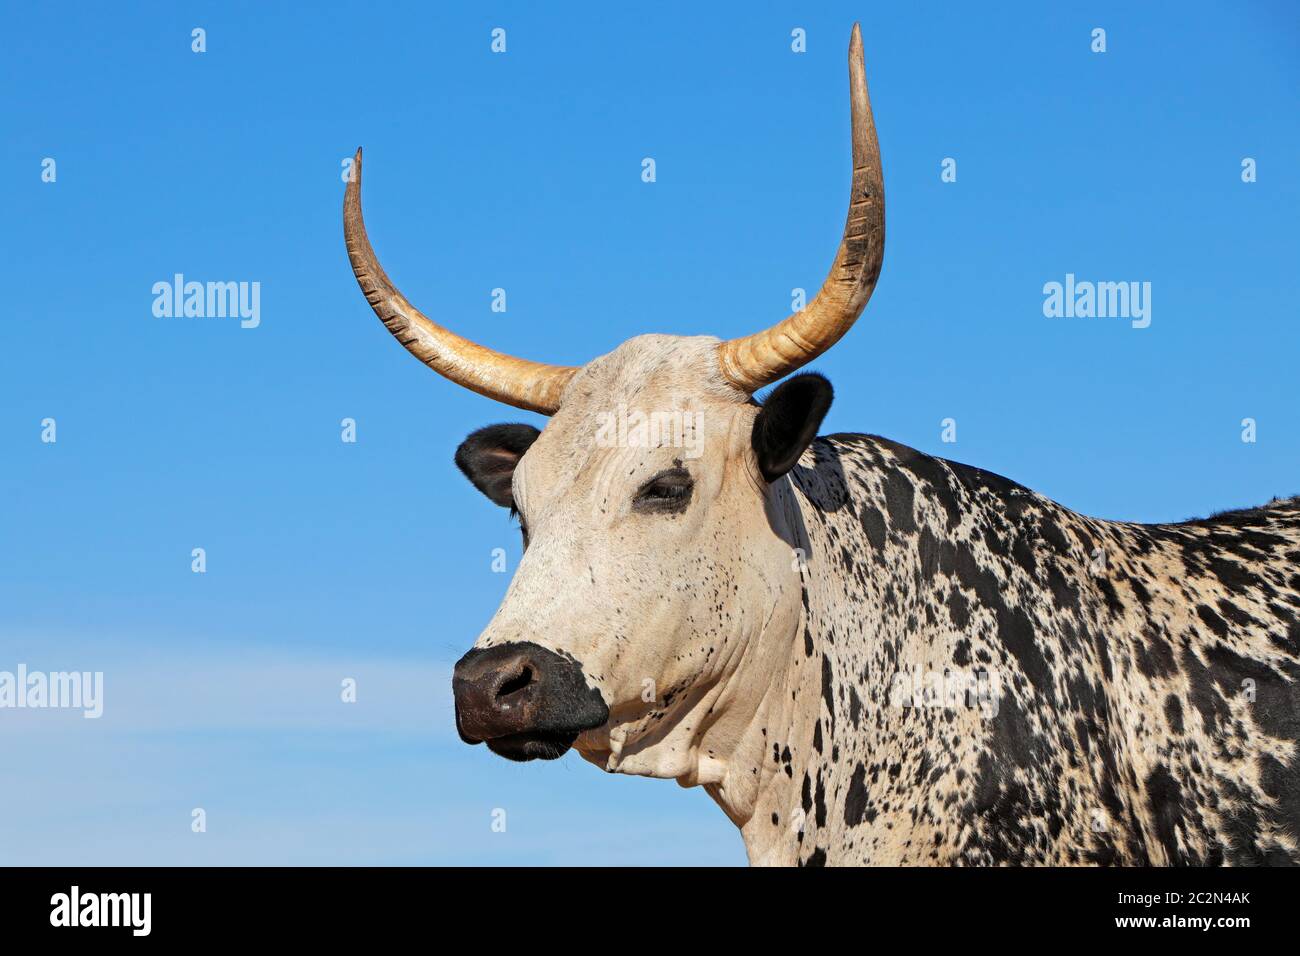 Portrait of a Nguni  cow - indigenous cattle breed of South Africa Stock Photo